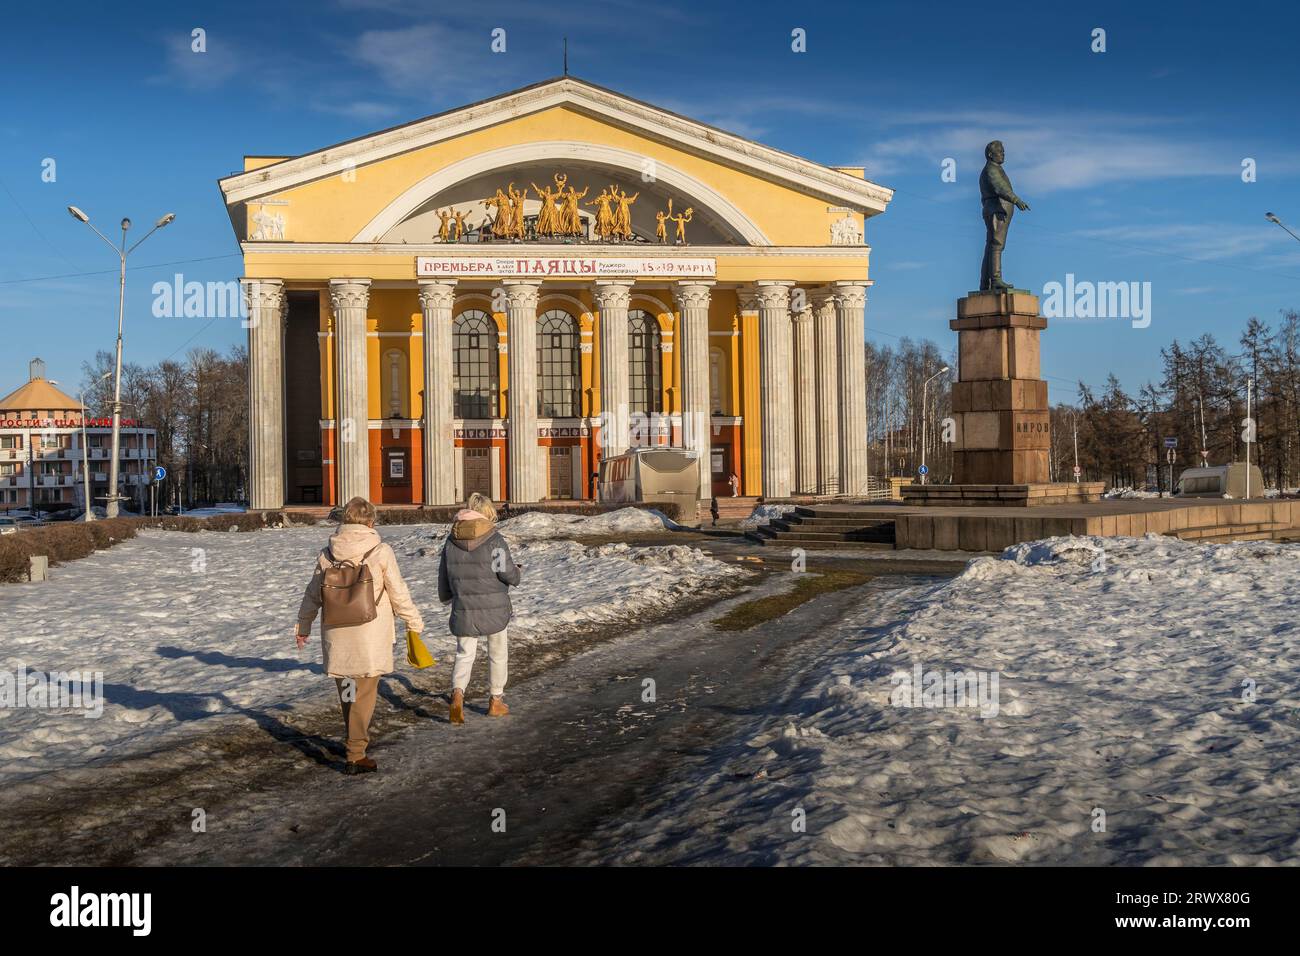 The people walk by the city plaza in front of the Kirov's monument and the theater building during the winter in Petrozavodsk, Karelia, Russia. Stock Photo